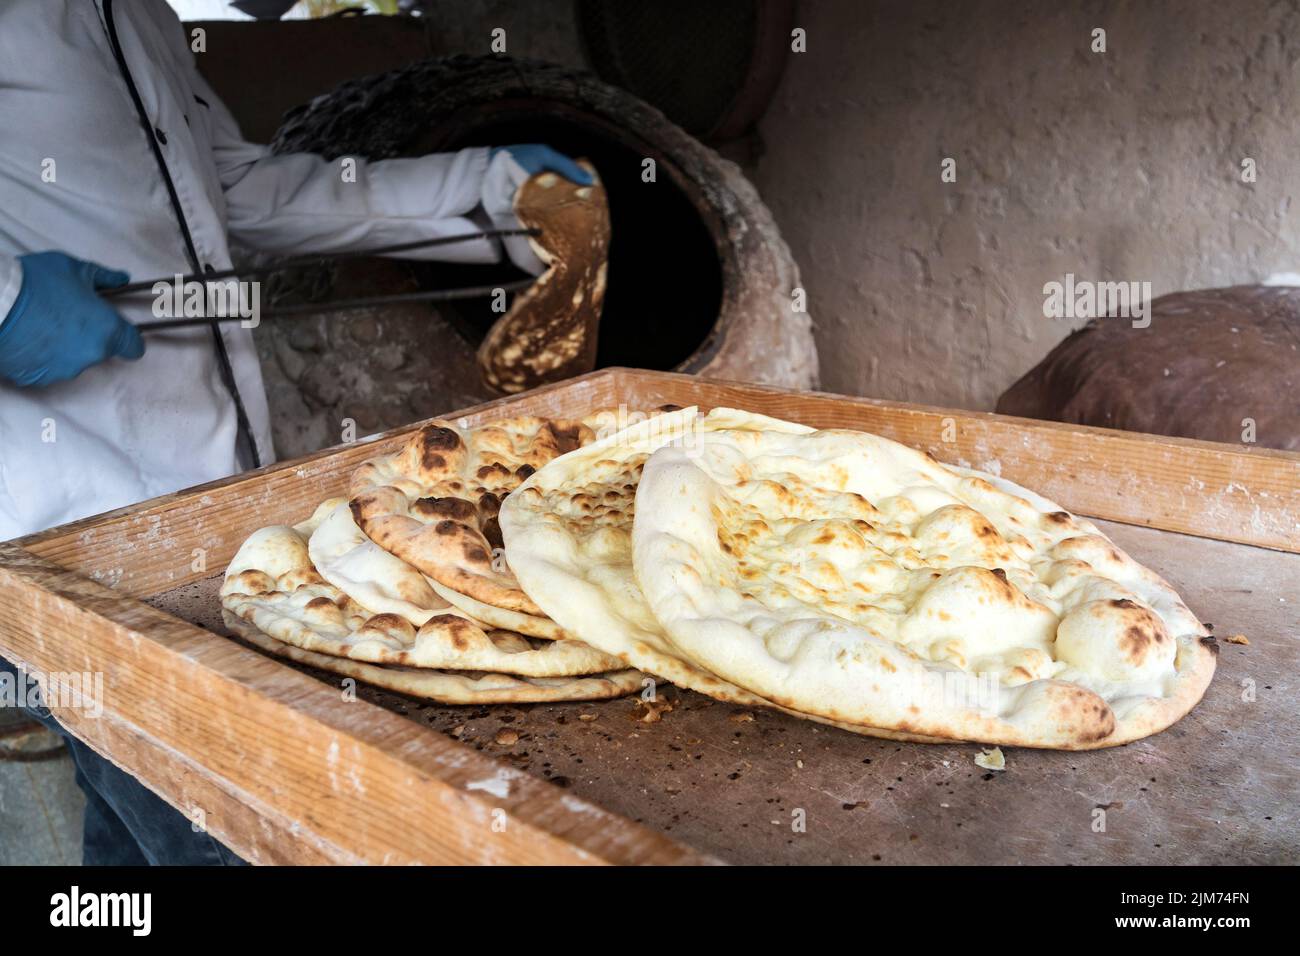 aged man makes traditional bread in old round stone oven in rural village. Large flat freshly baked tortillas lie on the table. Hot bread. Central Asi Stock Photo